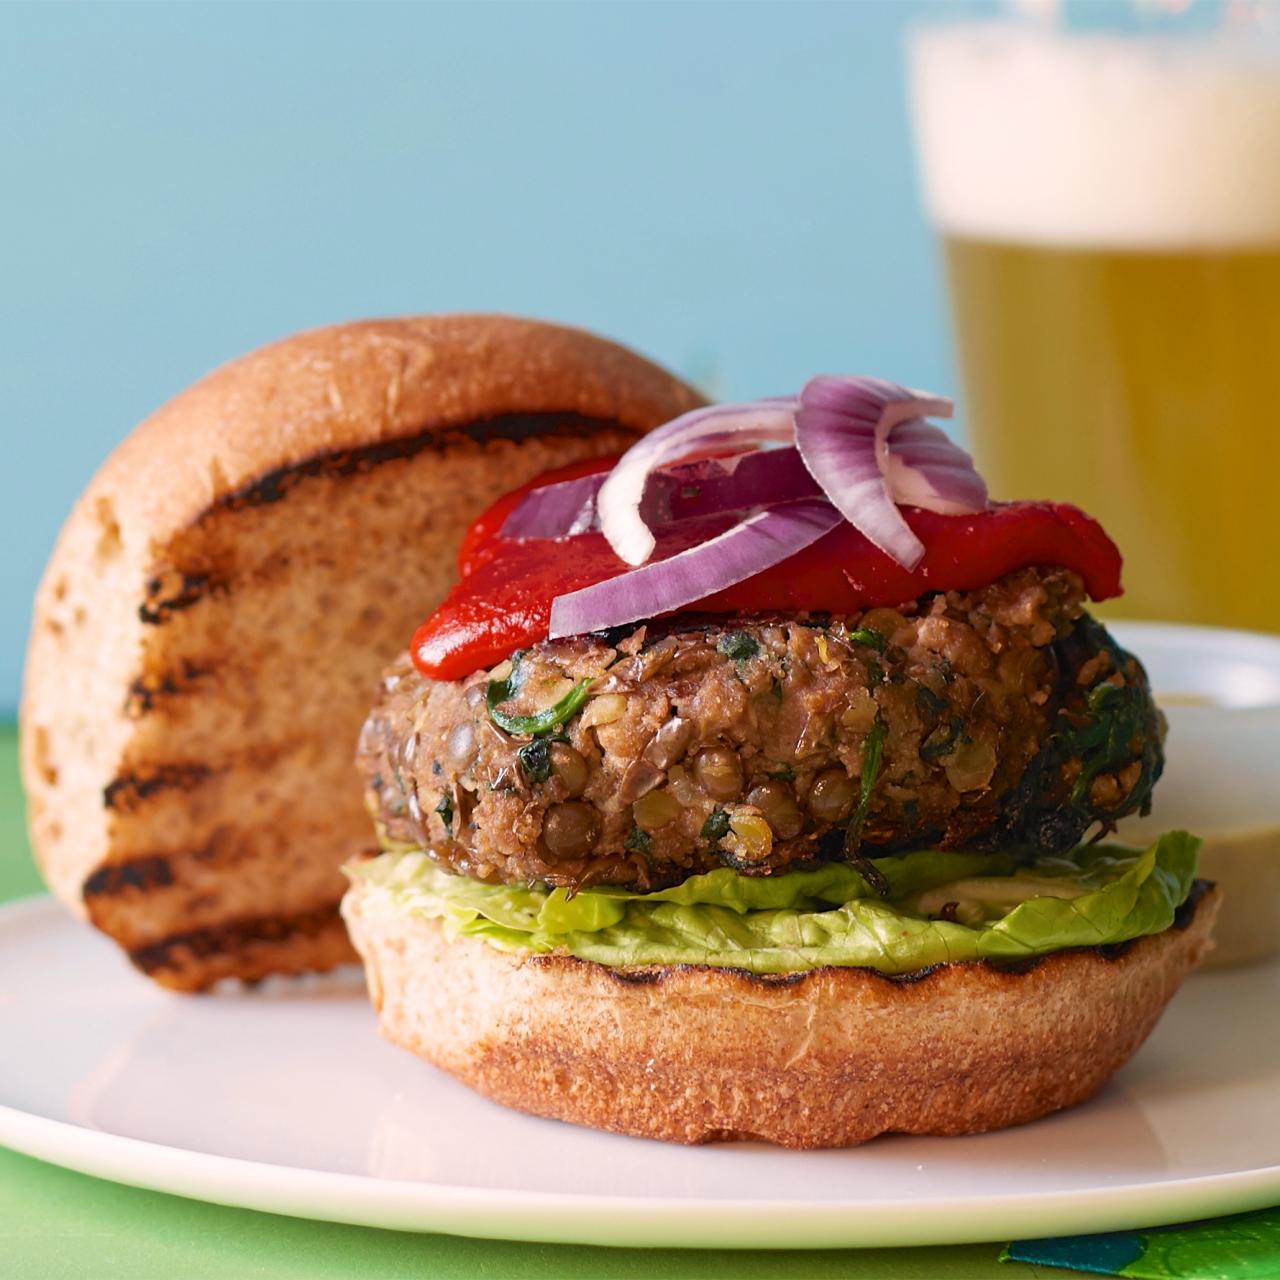 Lentils and vegetable burgers